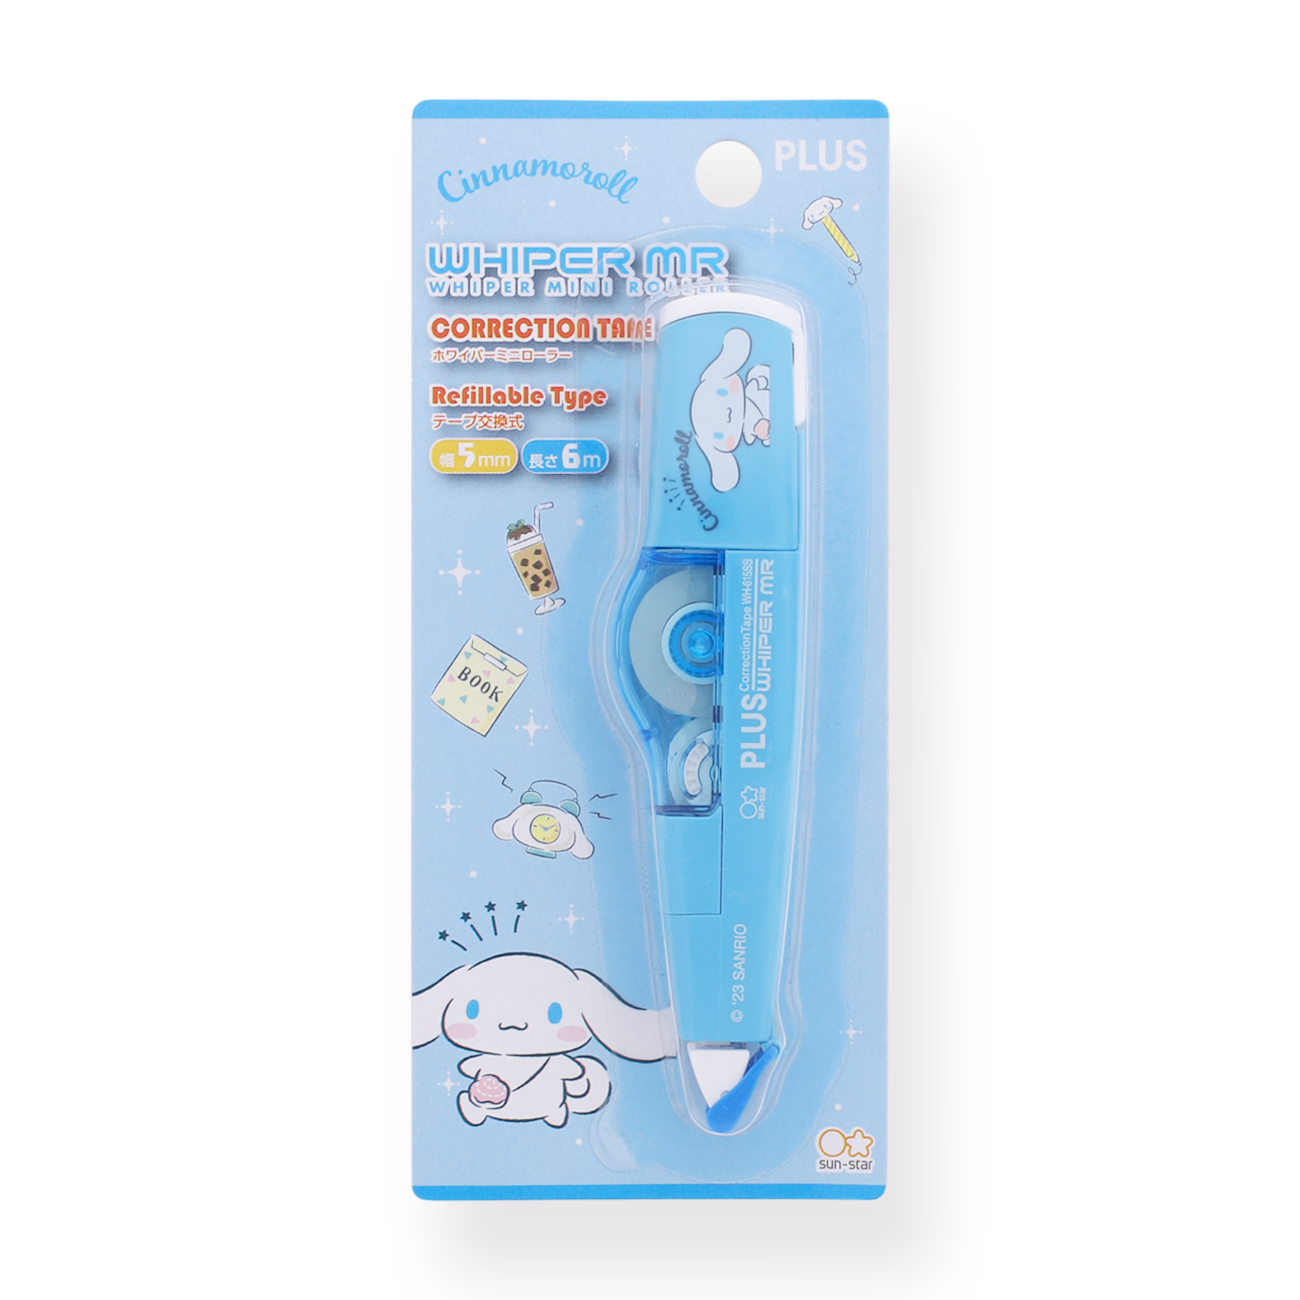 Plus Whiper MR Limited Edition Correction Tape - Cinnamoroll - Stationery Pal